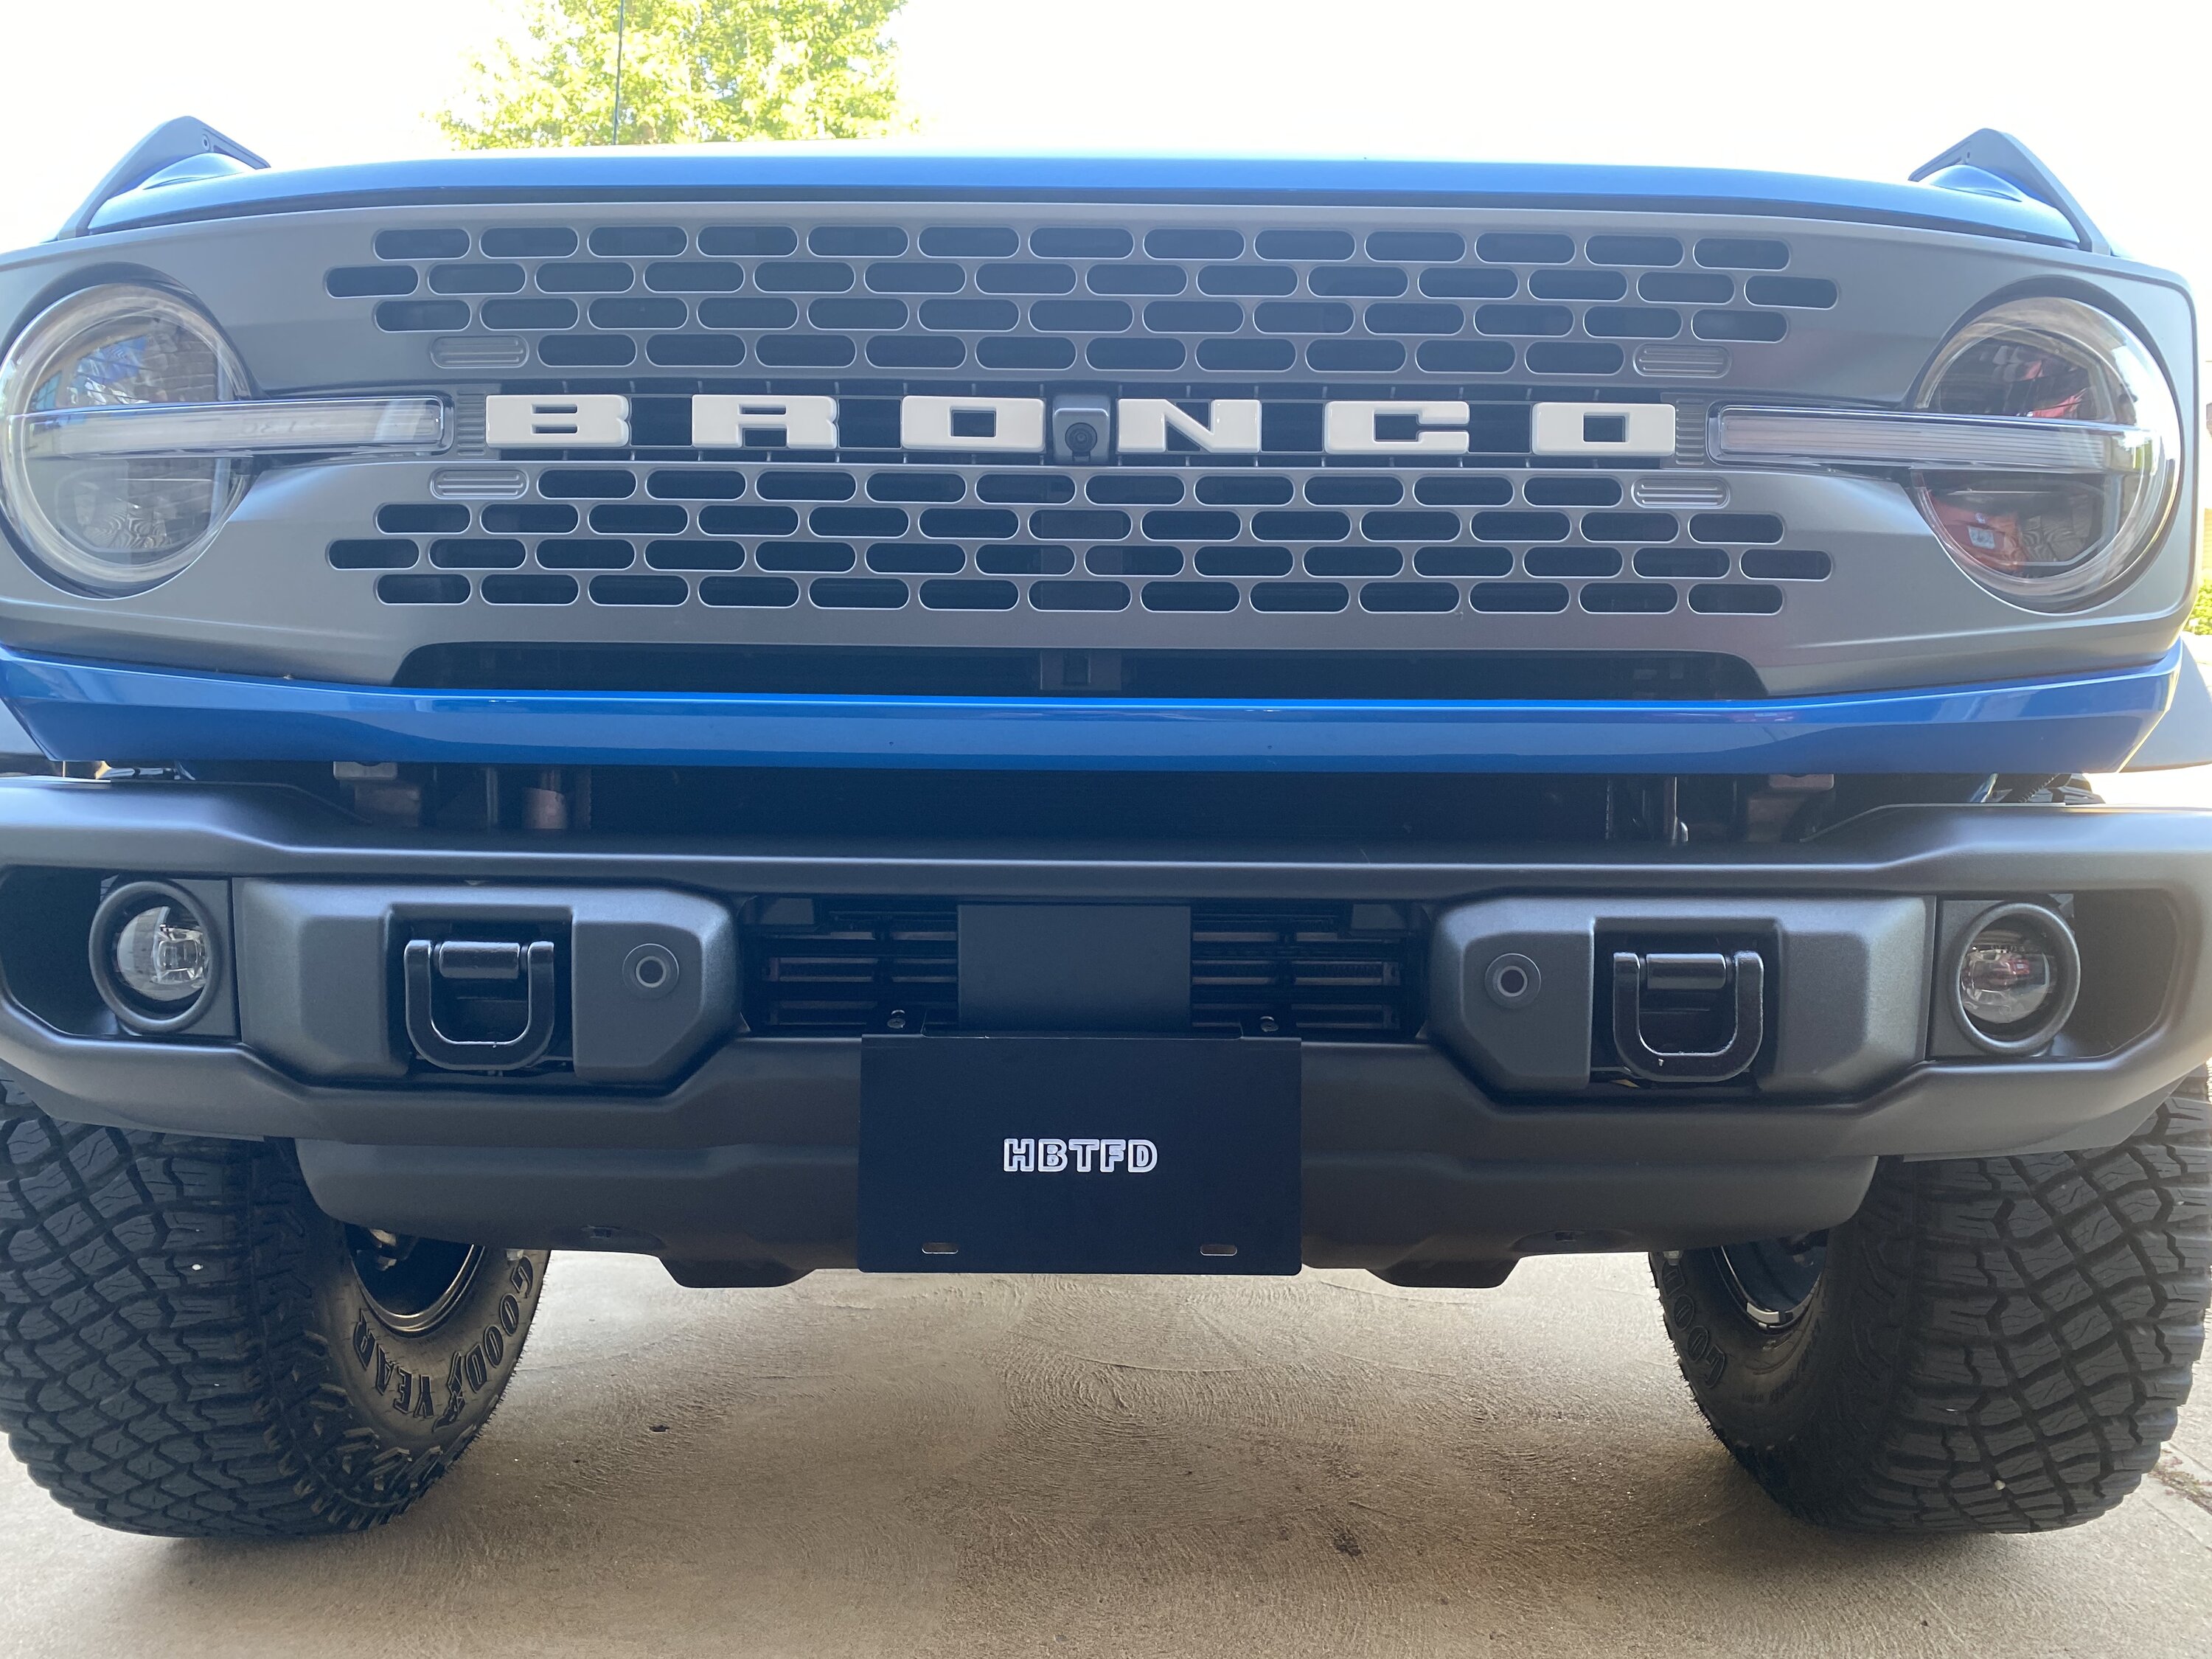 Ford Bronco Capable steel bumper license plate bracket (Heritage Bronco)- NO DRILLING required 4C67C7EF-1782-42A1-8B03-11BE54A2F650